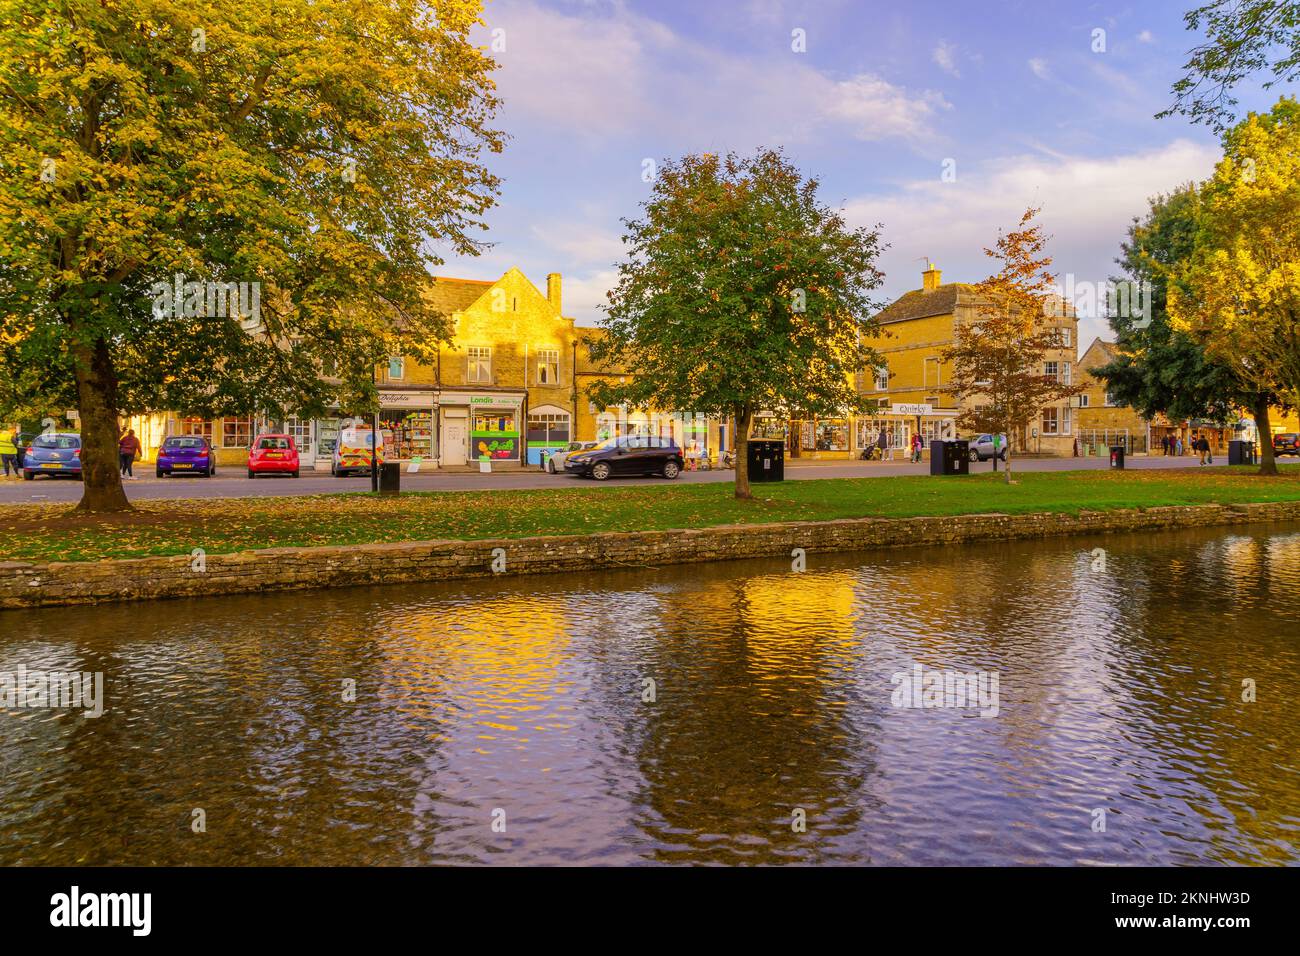 Bourton-on-the-Water, UK - October 17, 2022: Sunset scene of typical houses, the river Windrush, locals and visitors, in the village Bourton-on-the-Wa Stock Photo